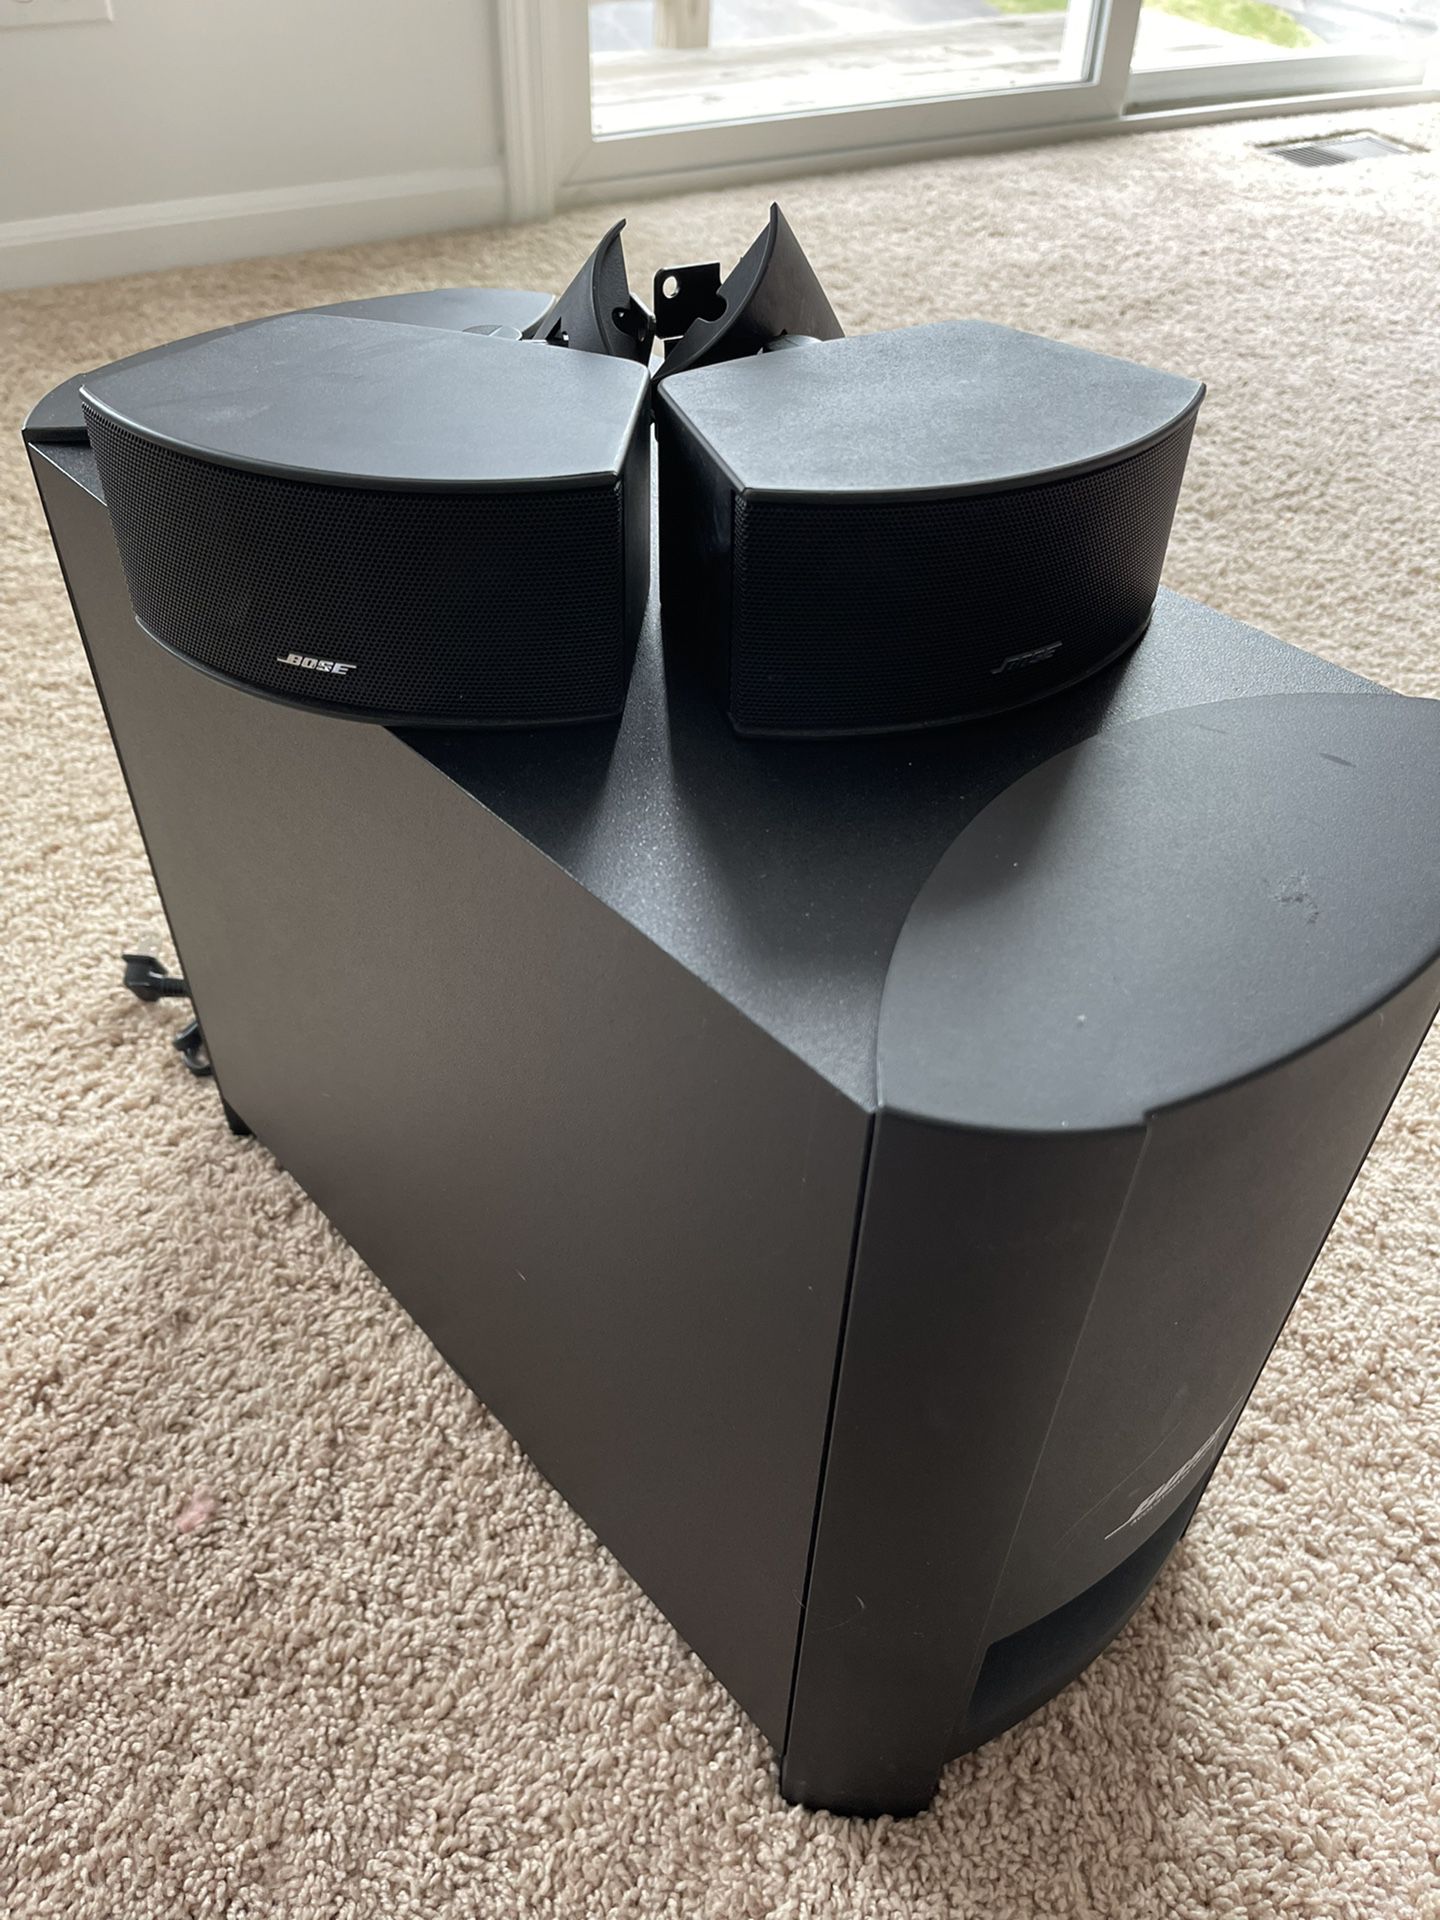 Bose CineMate Series II Home Theater Speaker System